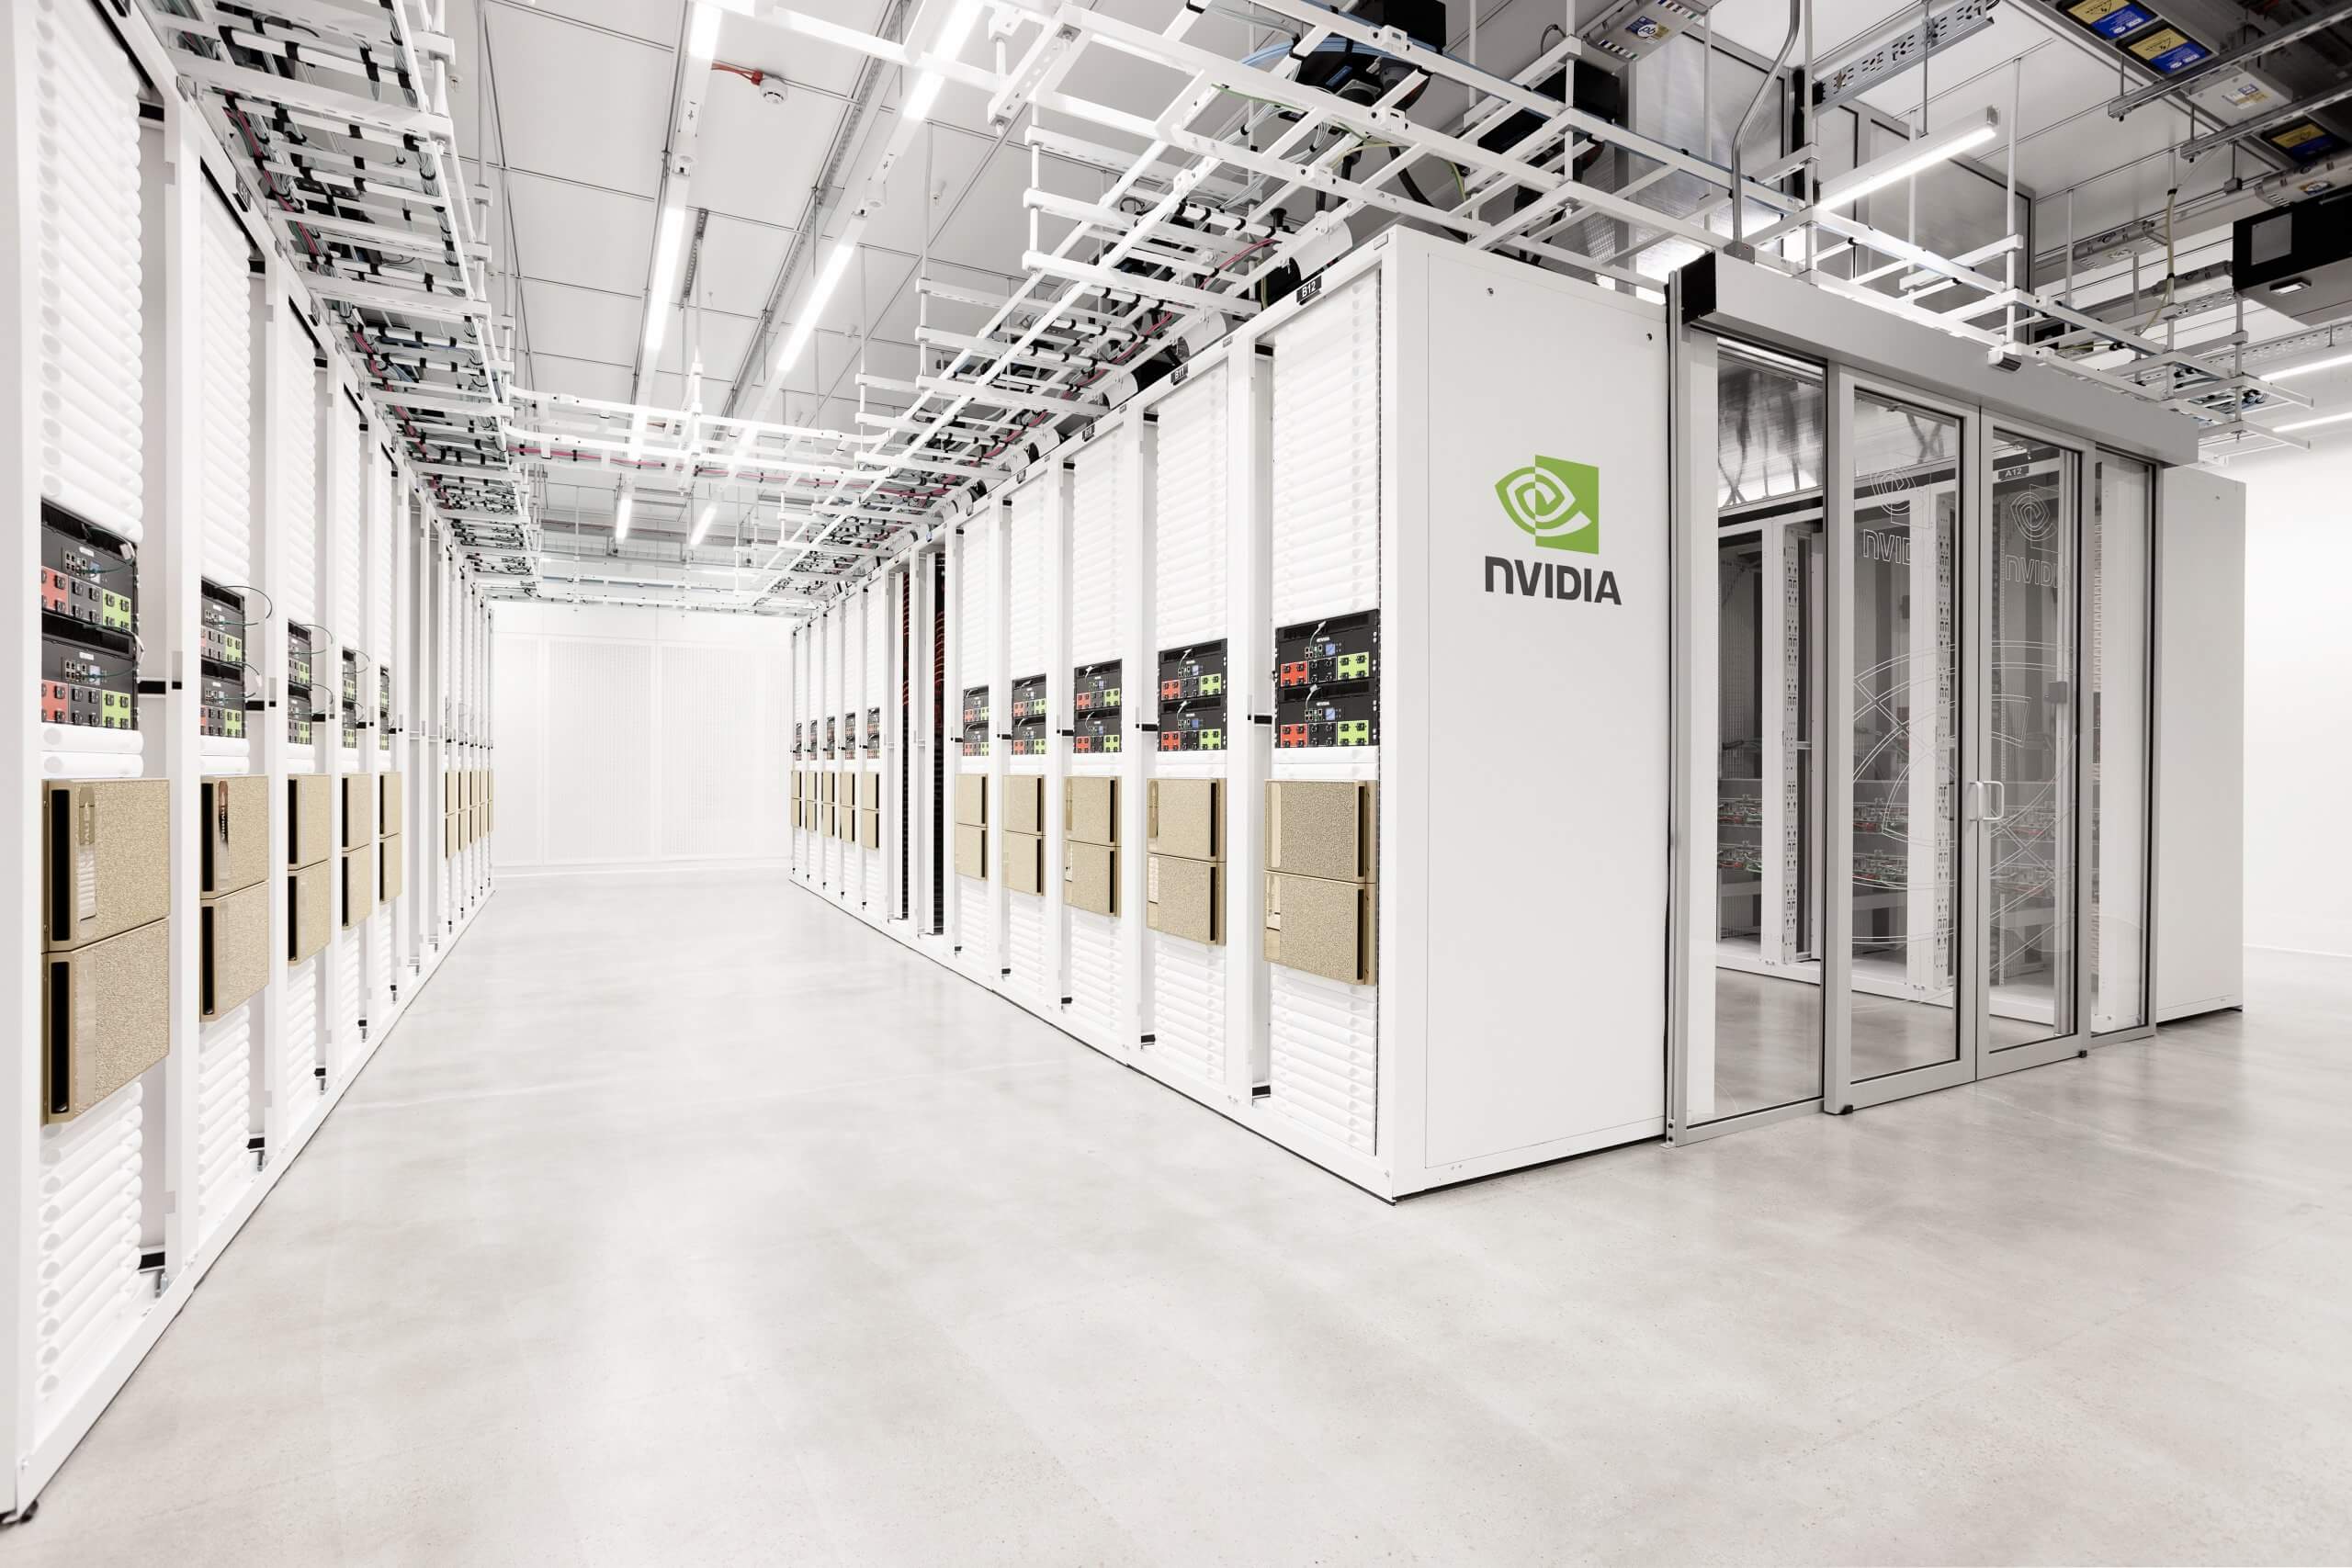 Cambridge-1, the UK's fastest #AI #supercomputer, is dedicated to industry specific #research in the UK. But is it the most powerful supercomputer in the world?